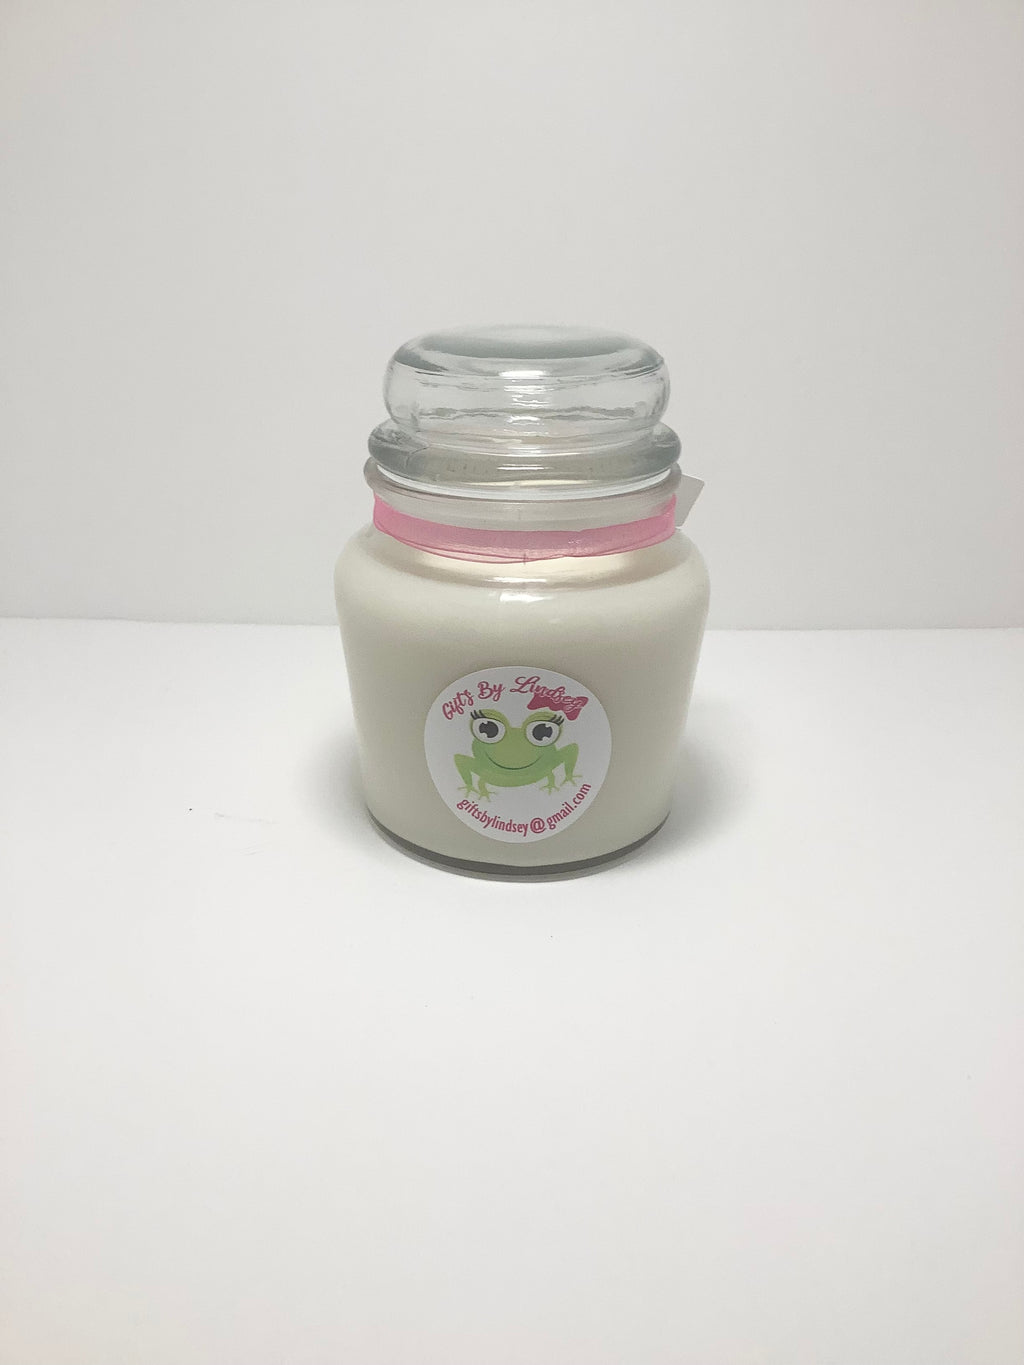 Magnolia and Peony soy candle